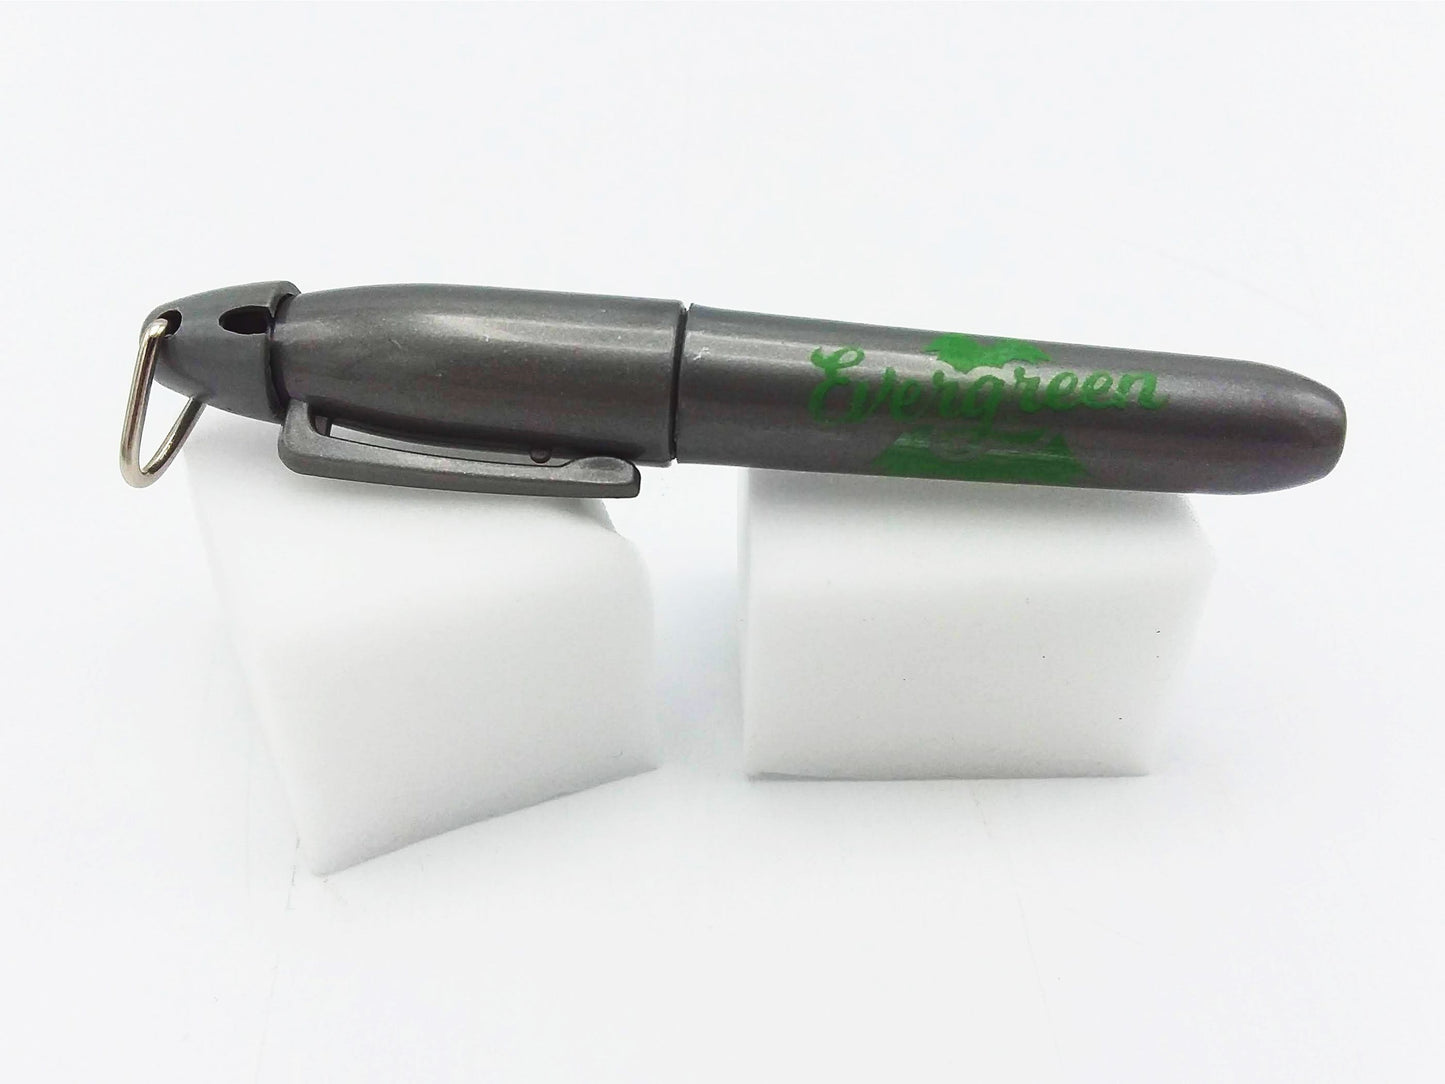 Evergreen marking set with closed marker and eraser